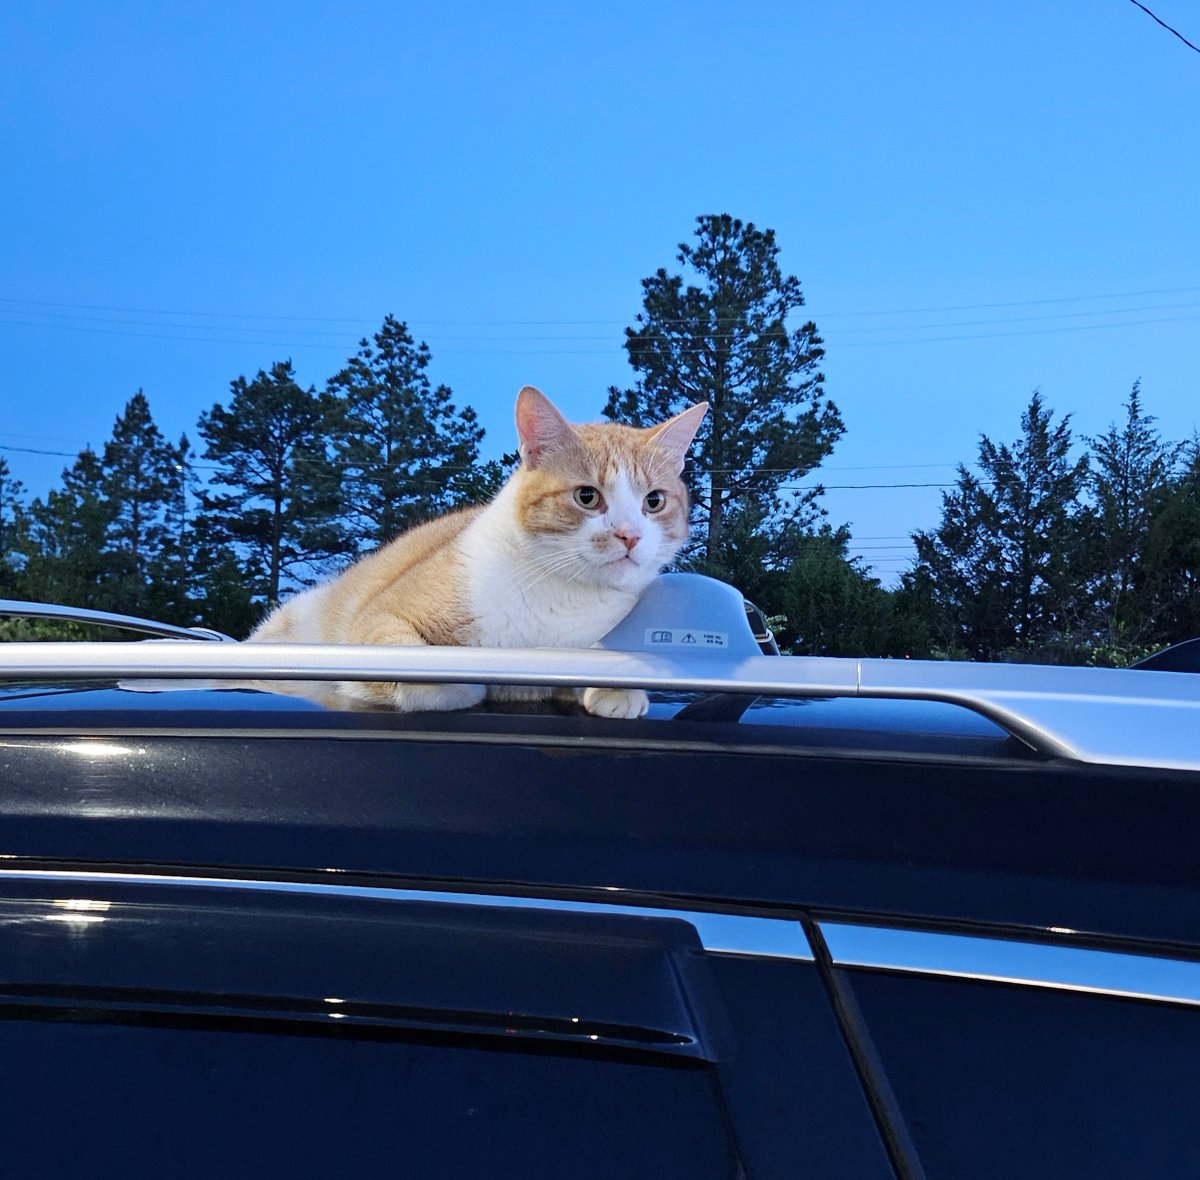 Well at least I know my car is safe this evening. #arwx #TarmacTheWeatherCat